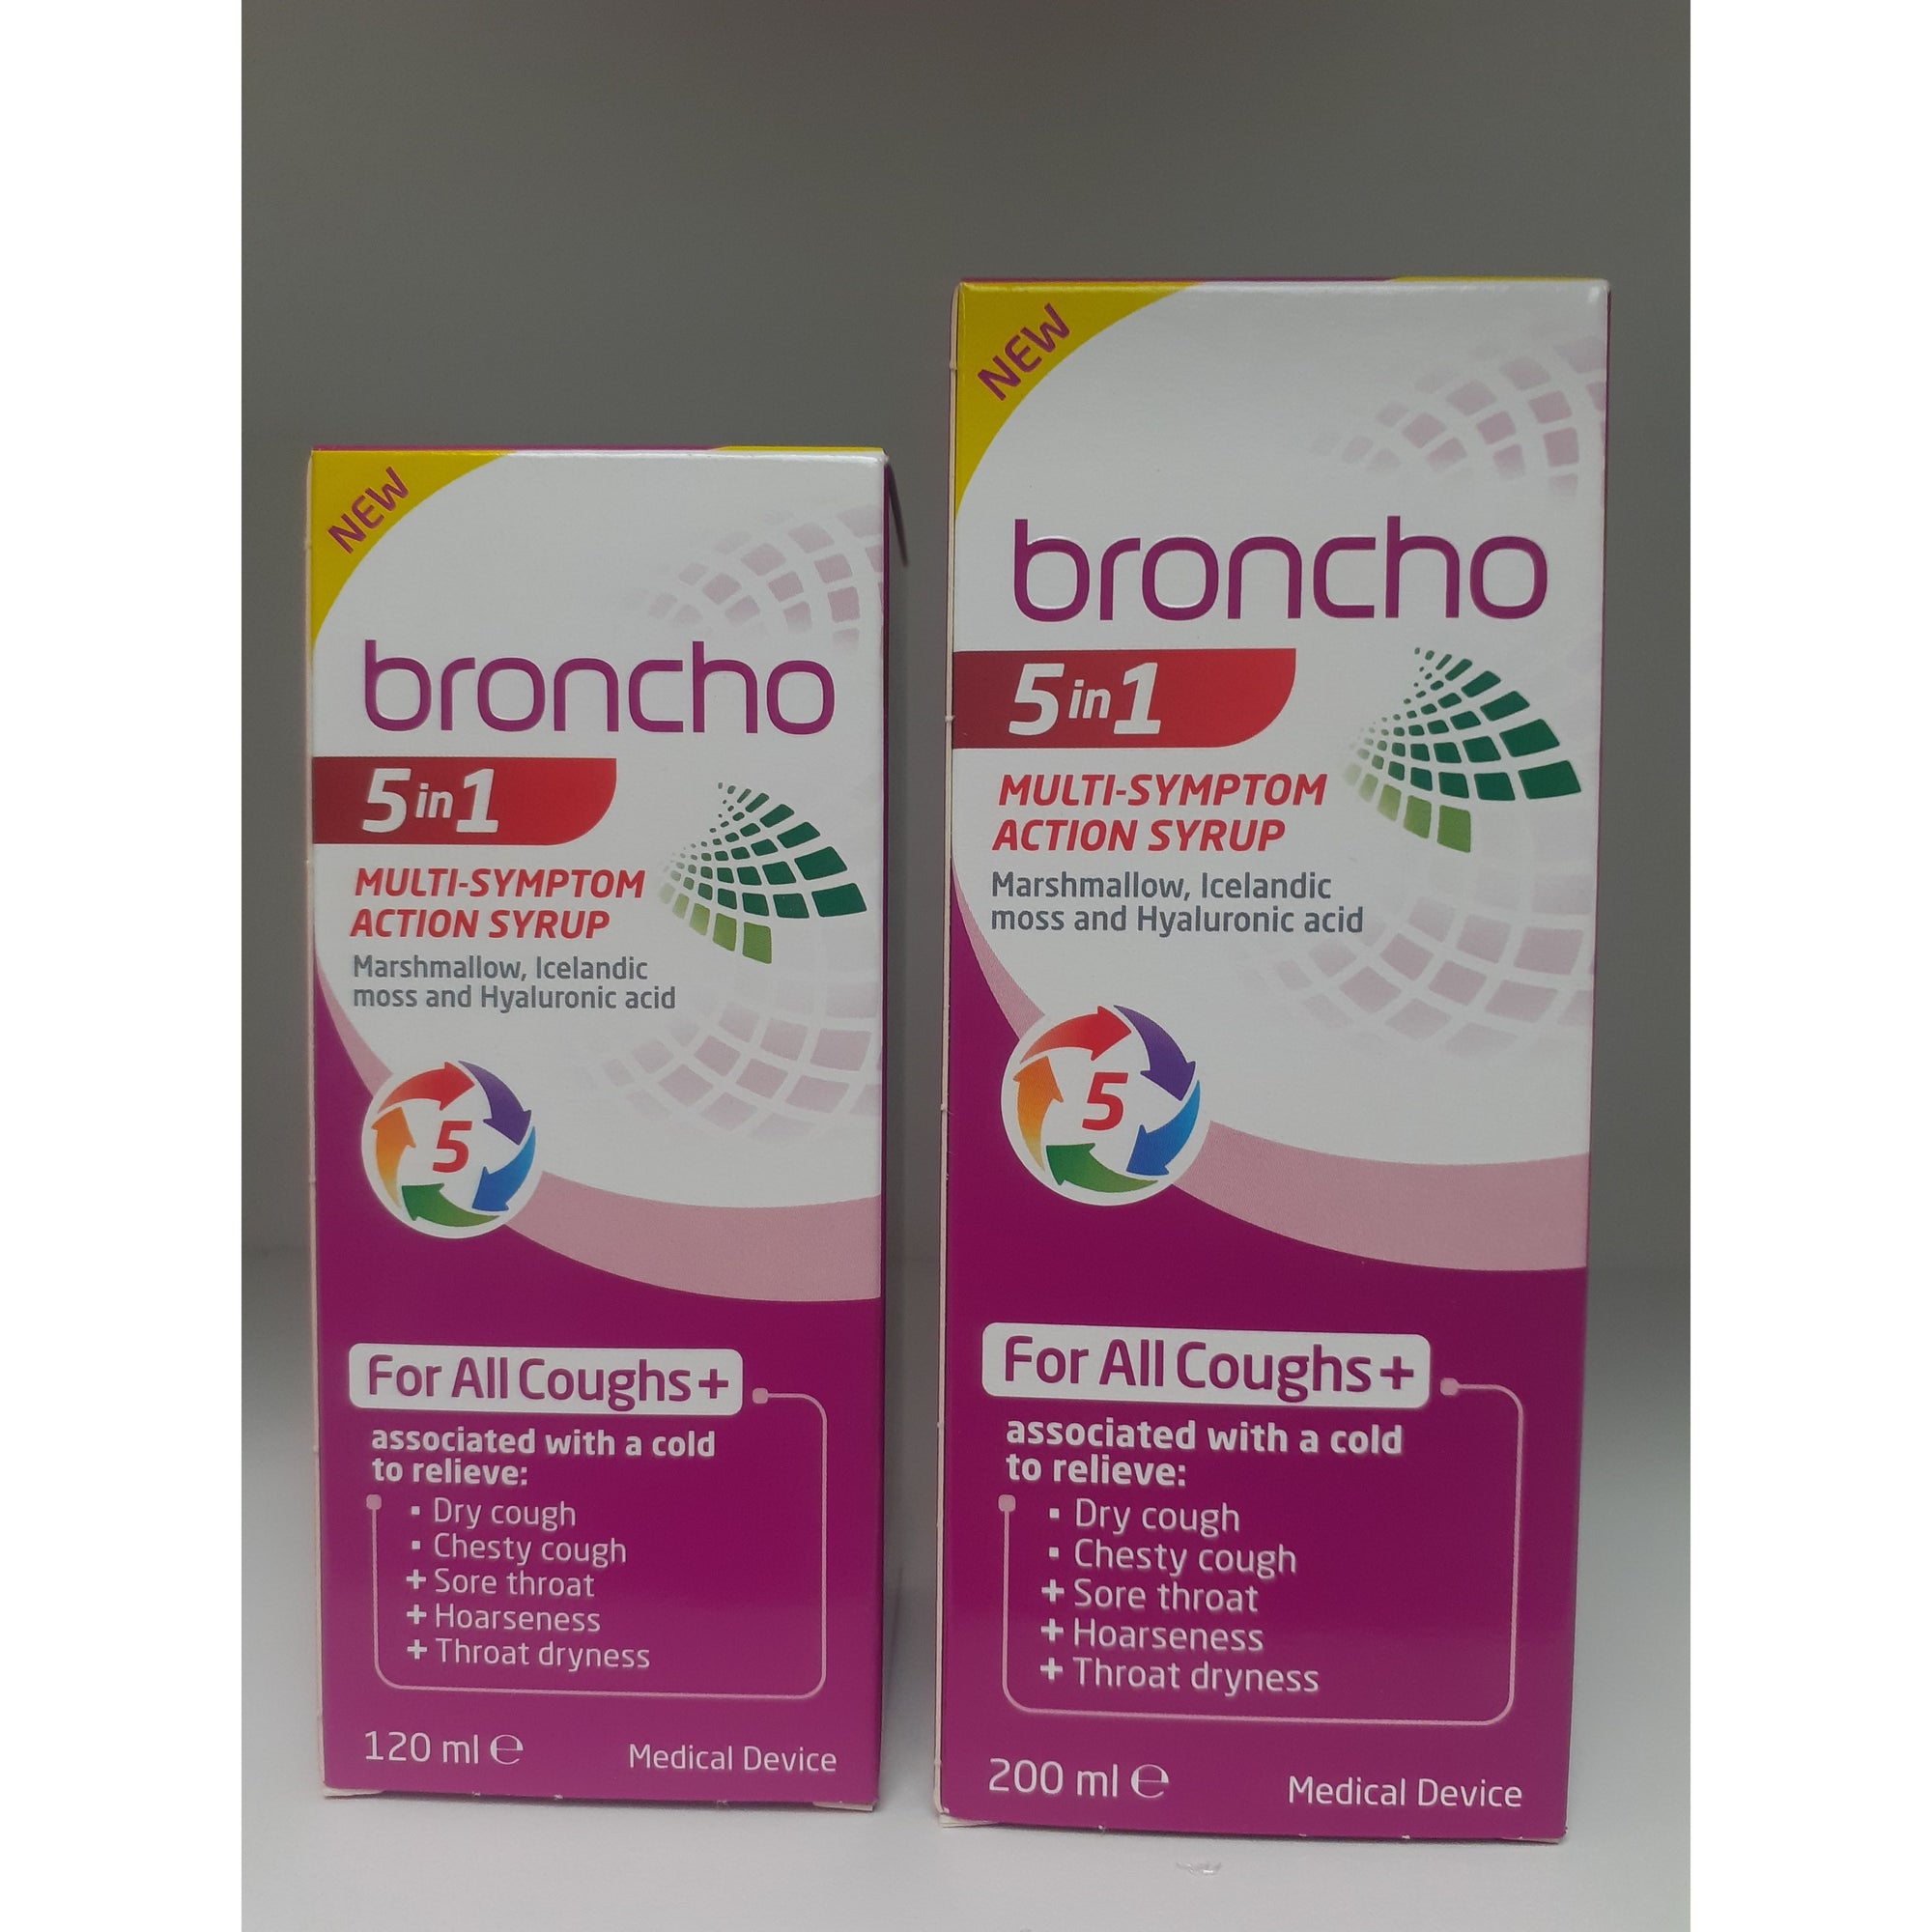 Broncho 5 in 1 Multi-Symptom Action Syrup